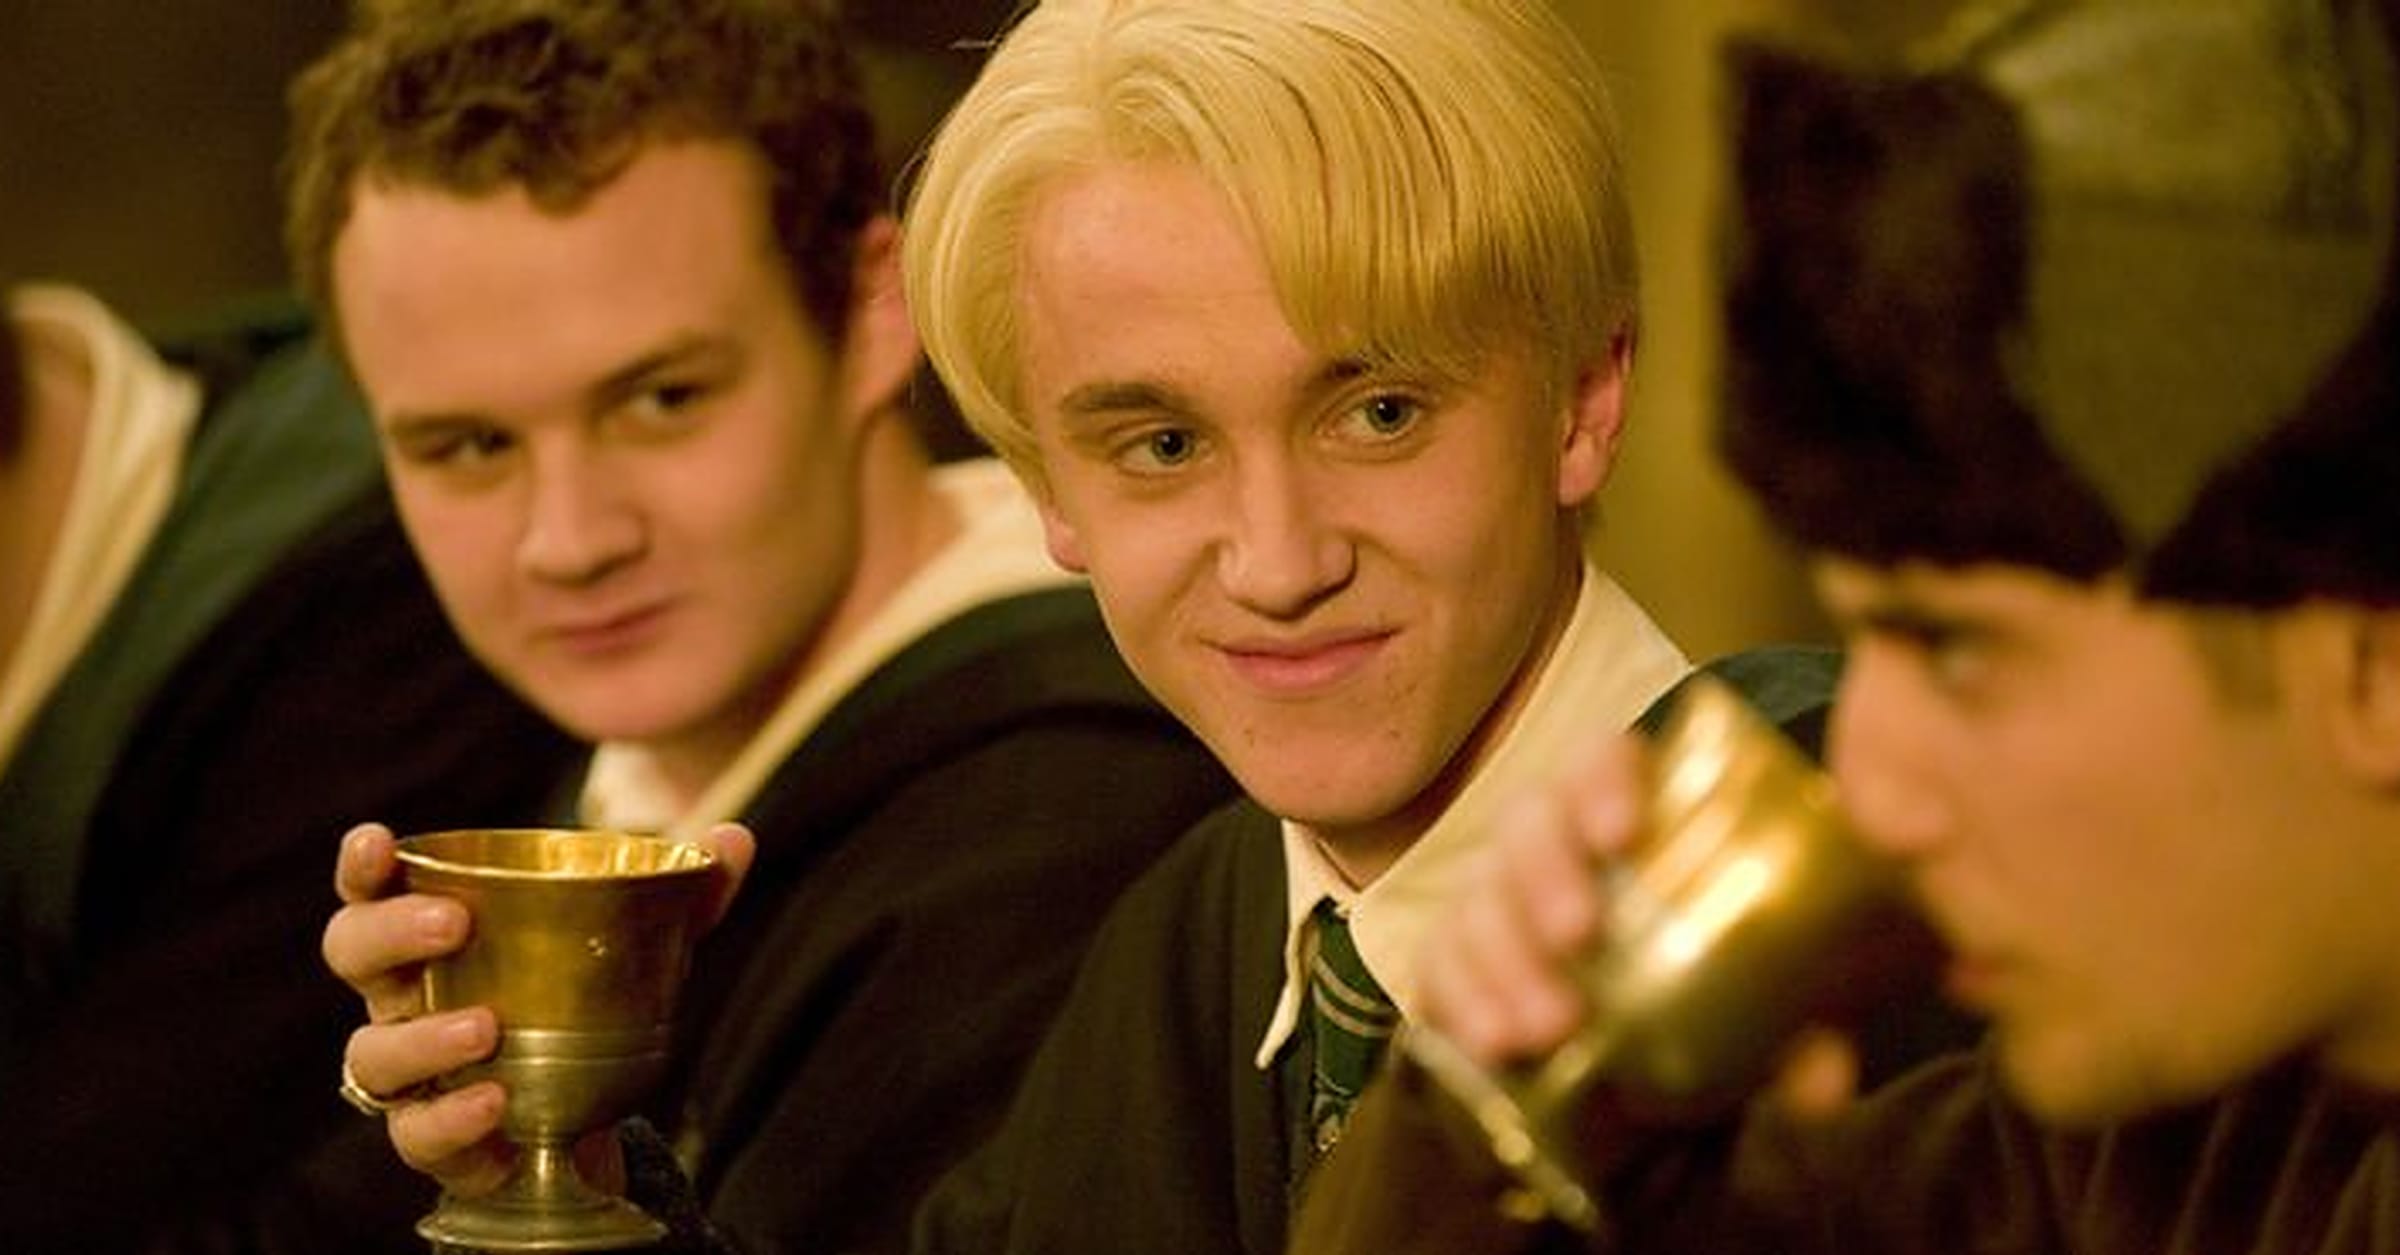 Facts About Draco Malfoy That Aren't In The Films